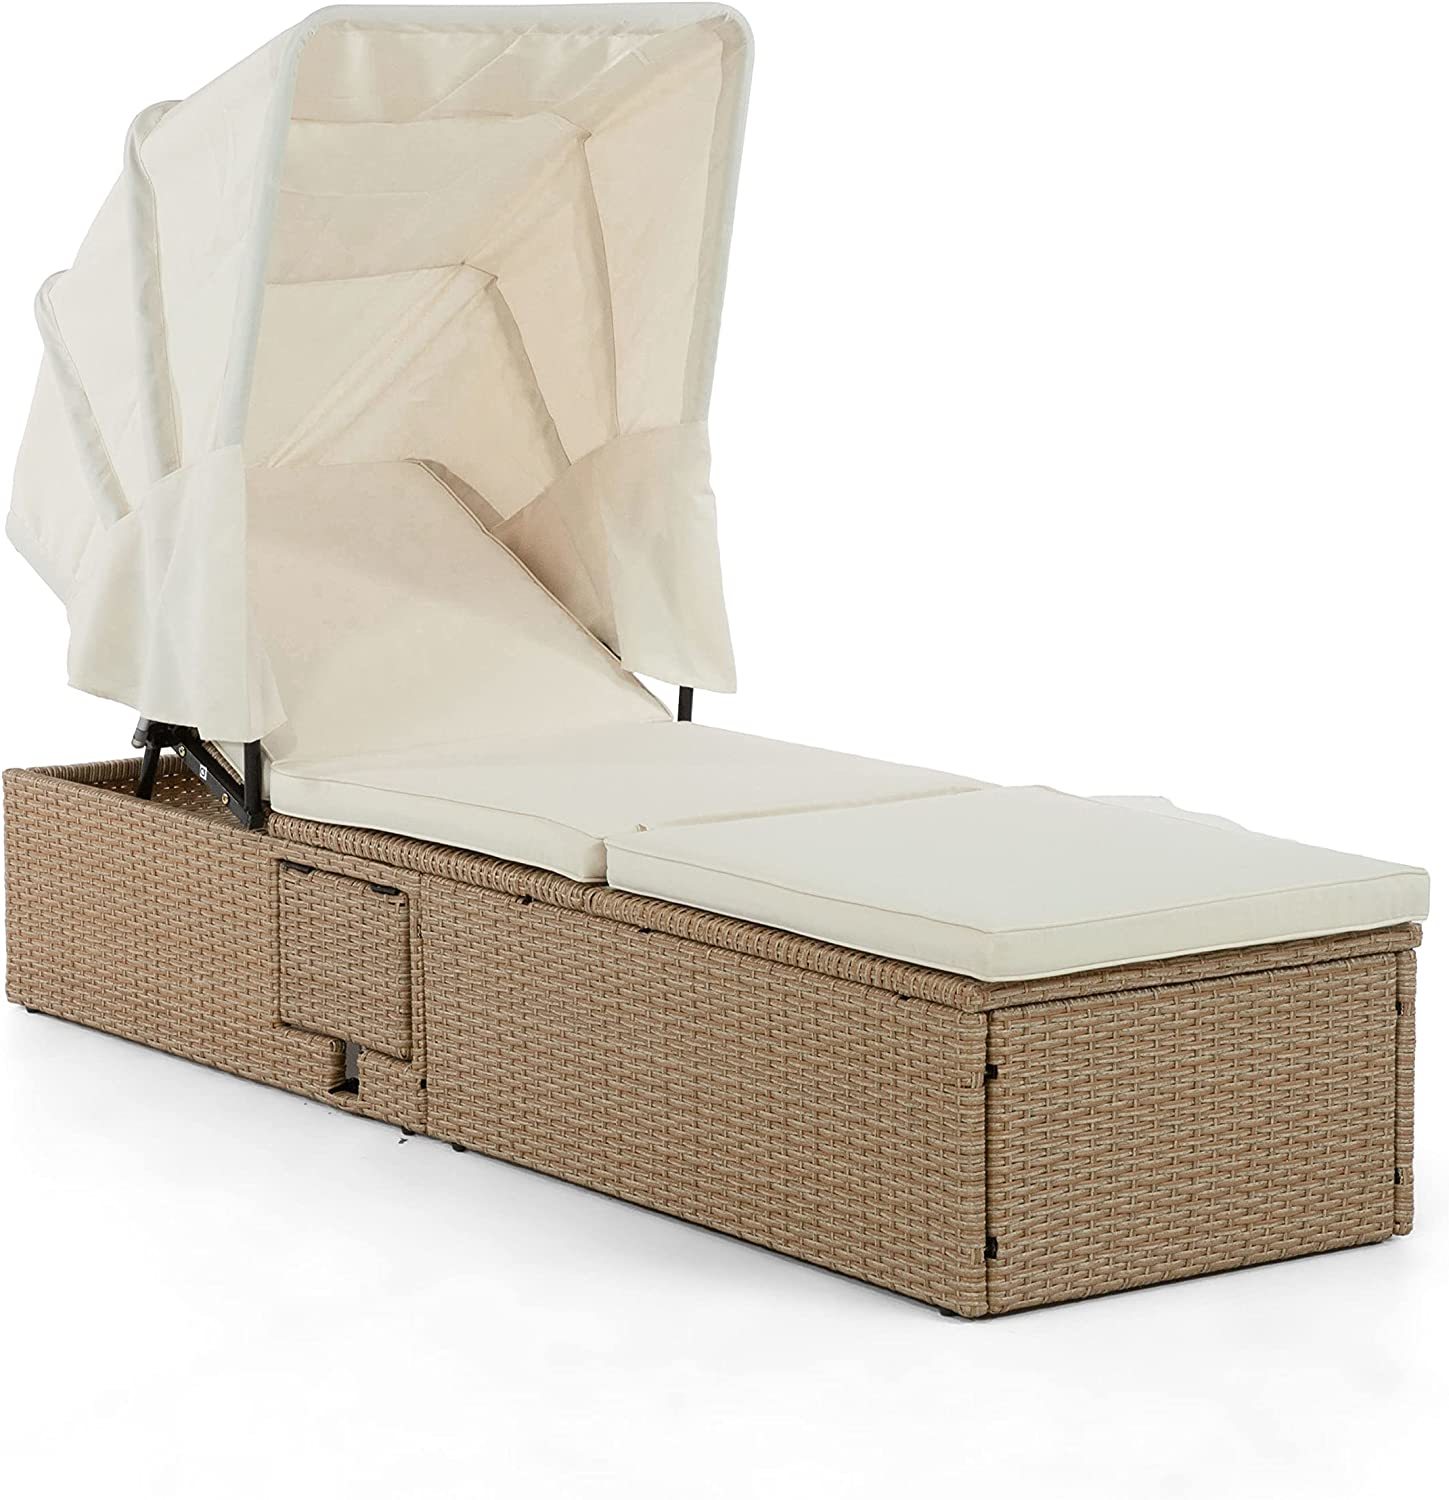 Primary image for Natural Mobler Outdoor Patio Daybed By Muse And Lounge Co.